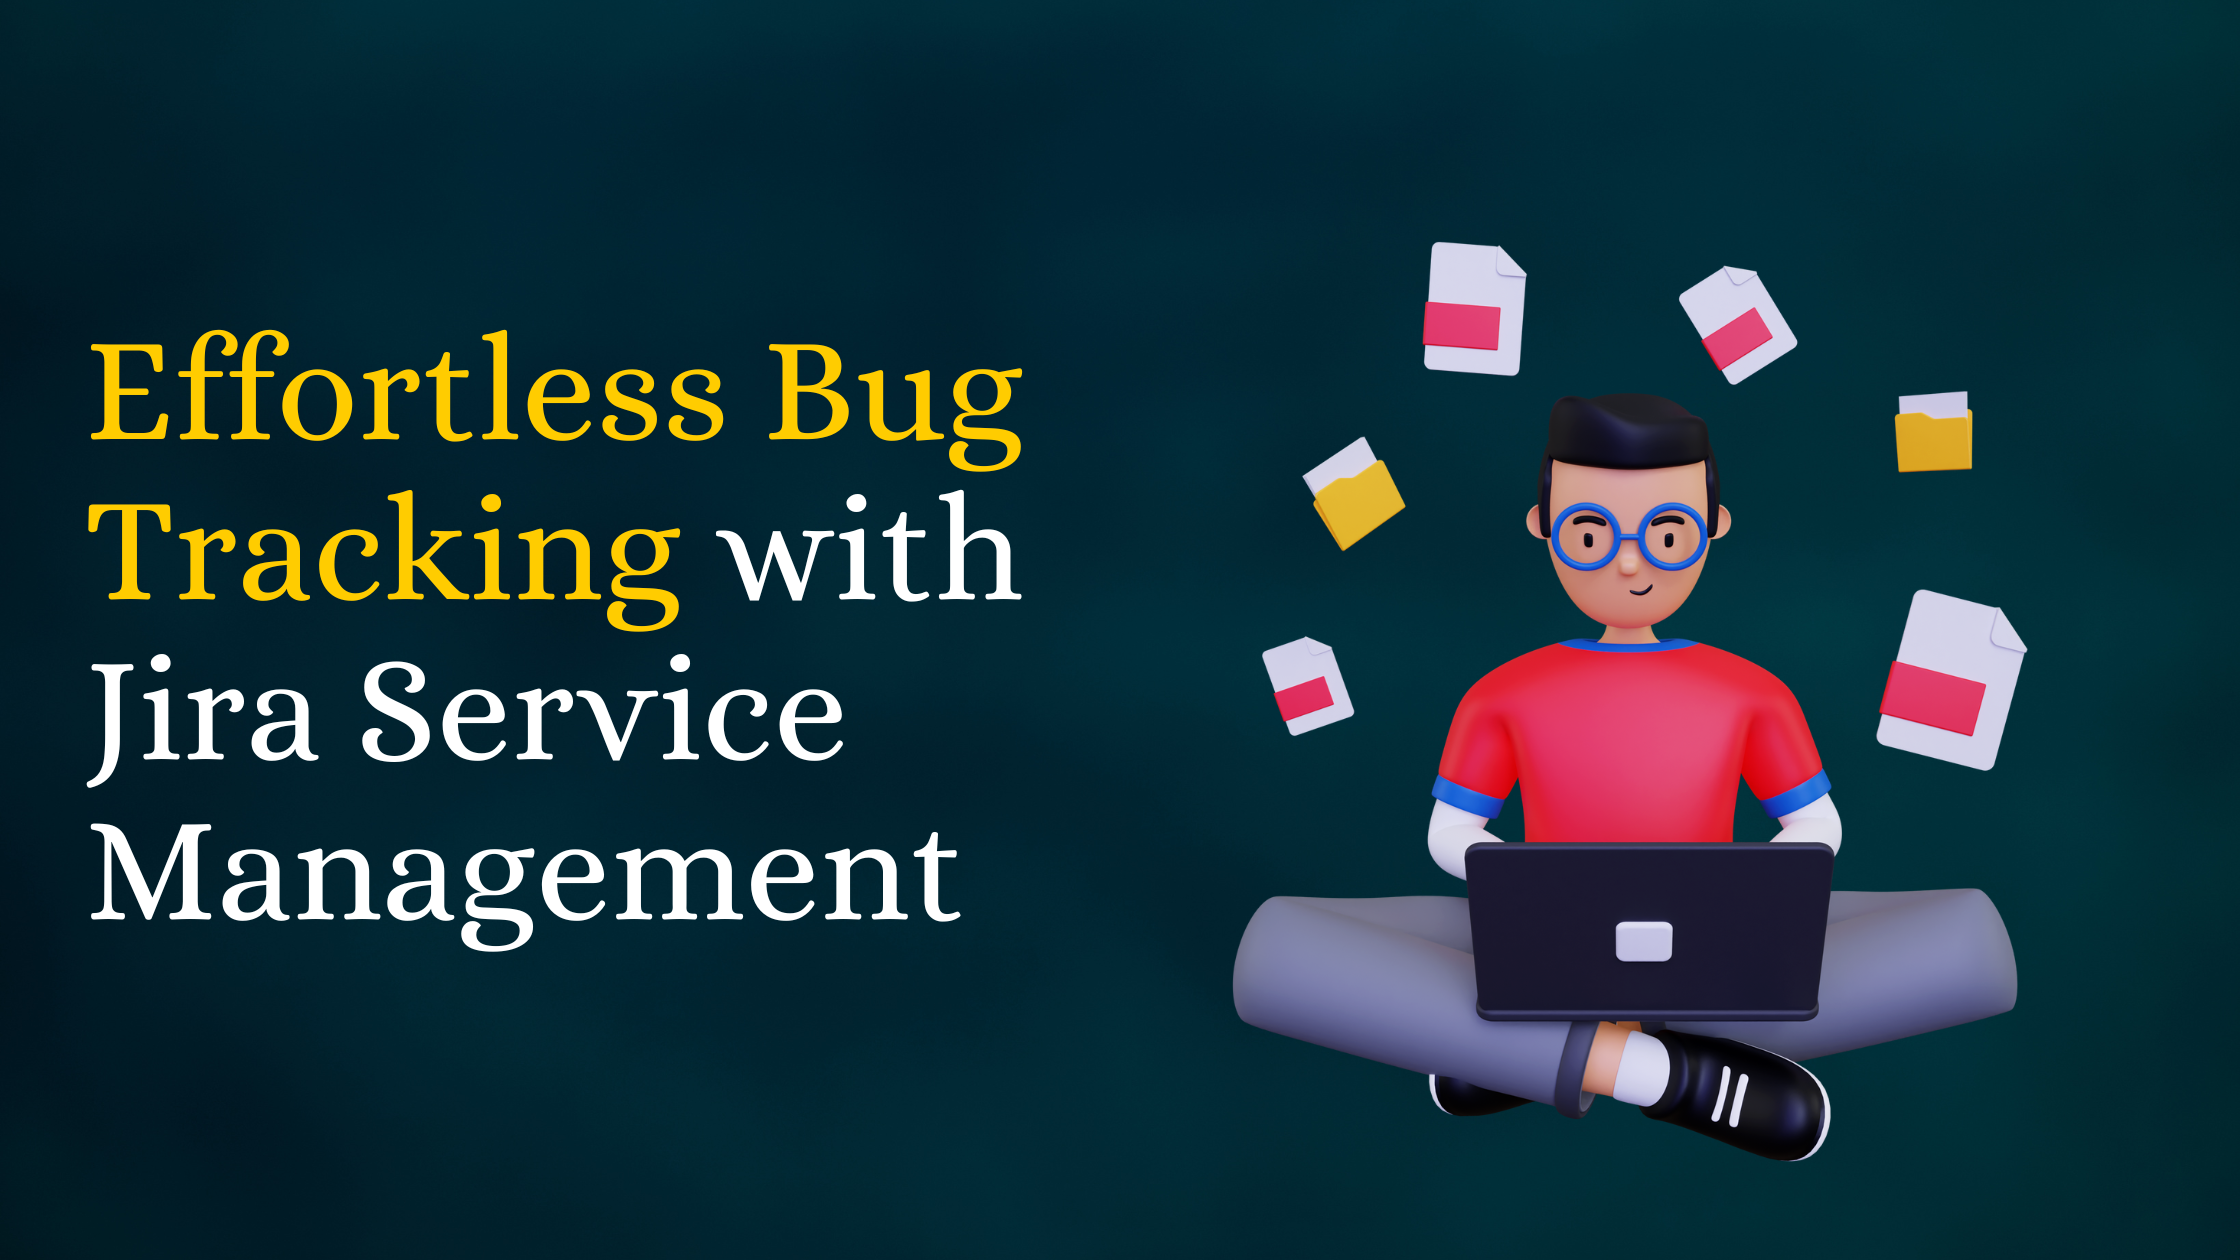 Mastering Bug Tracking in Jira Service Management: 4 Best Practices